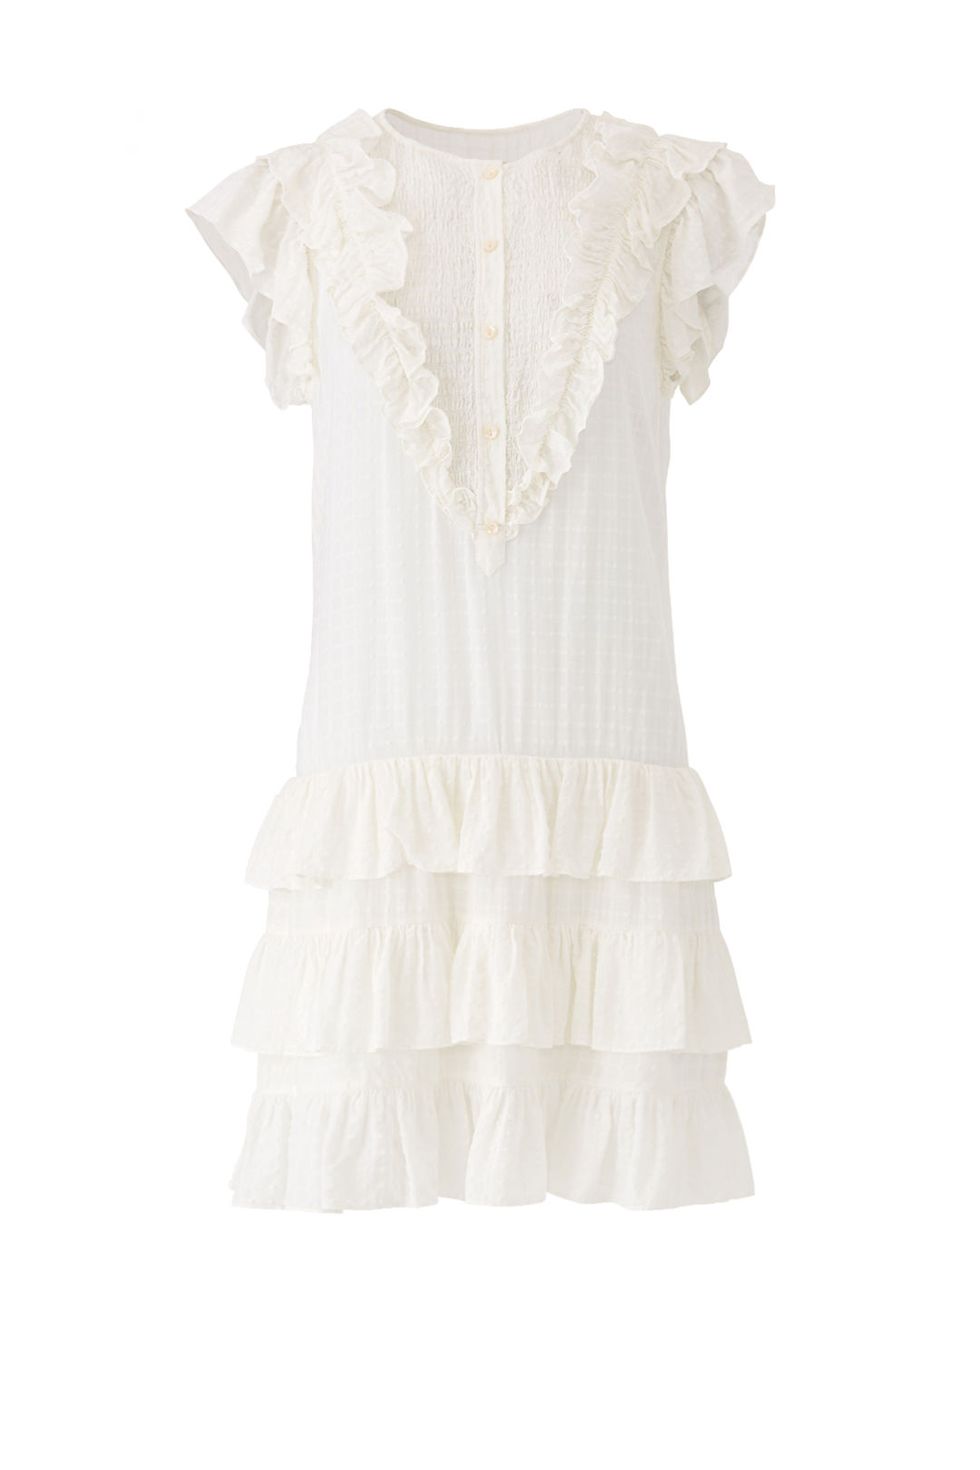 Lace It Back Sheath by MSGM for $195